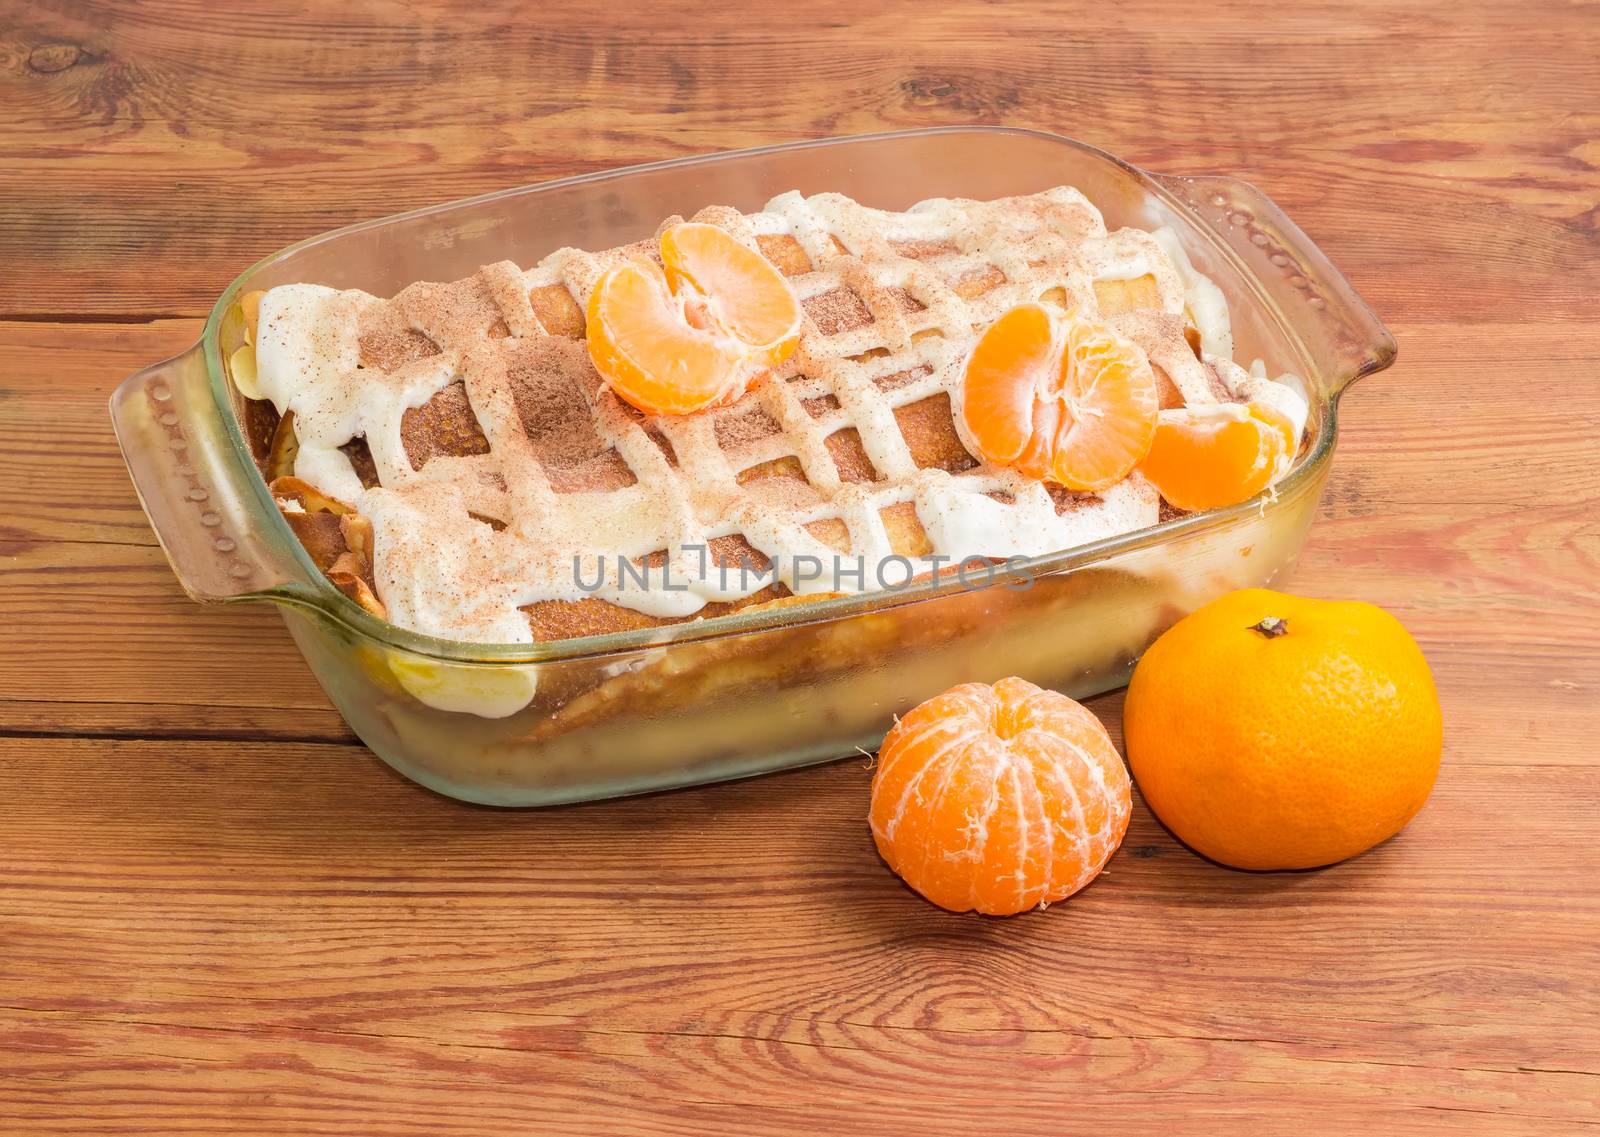 Sweet pancakes filled with cottage cheese with sour cream and sprinkled with cinnamon powder in the rectangular glass roasting pan and mandarins on old wooden surface
